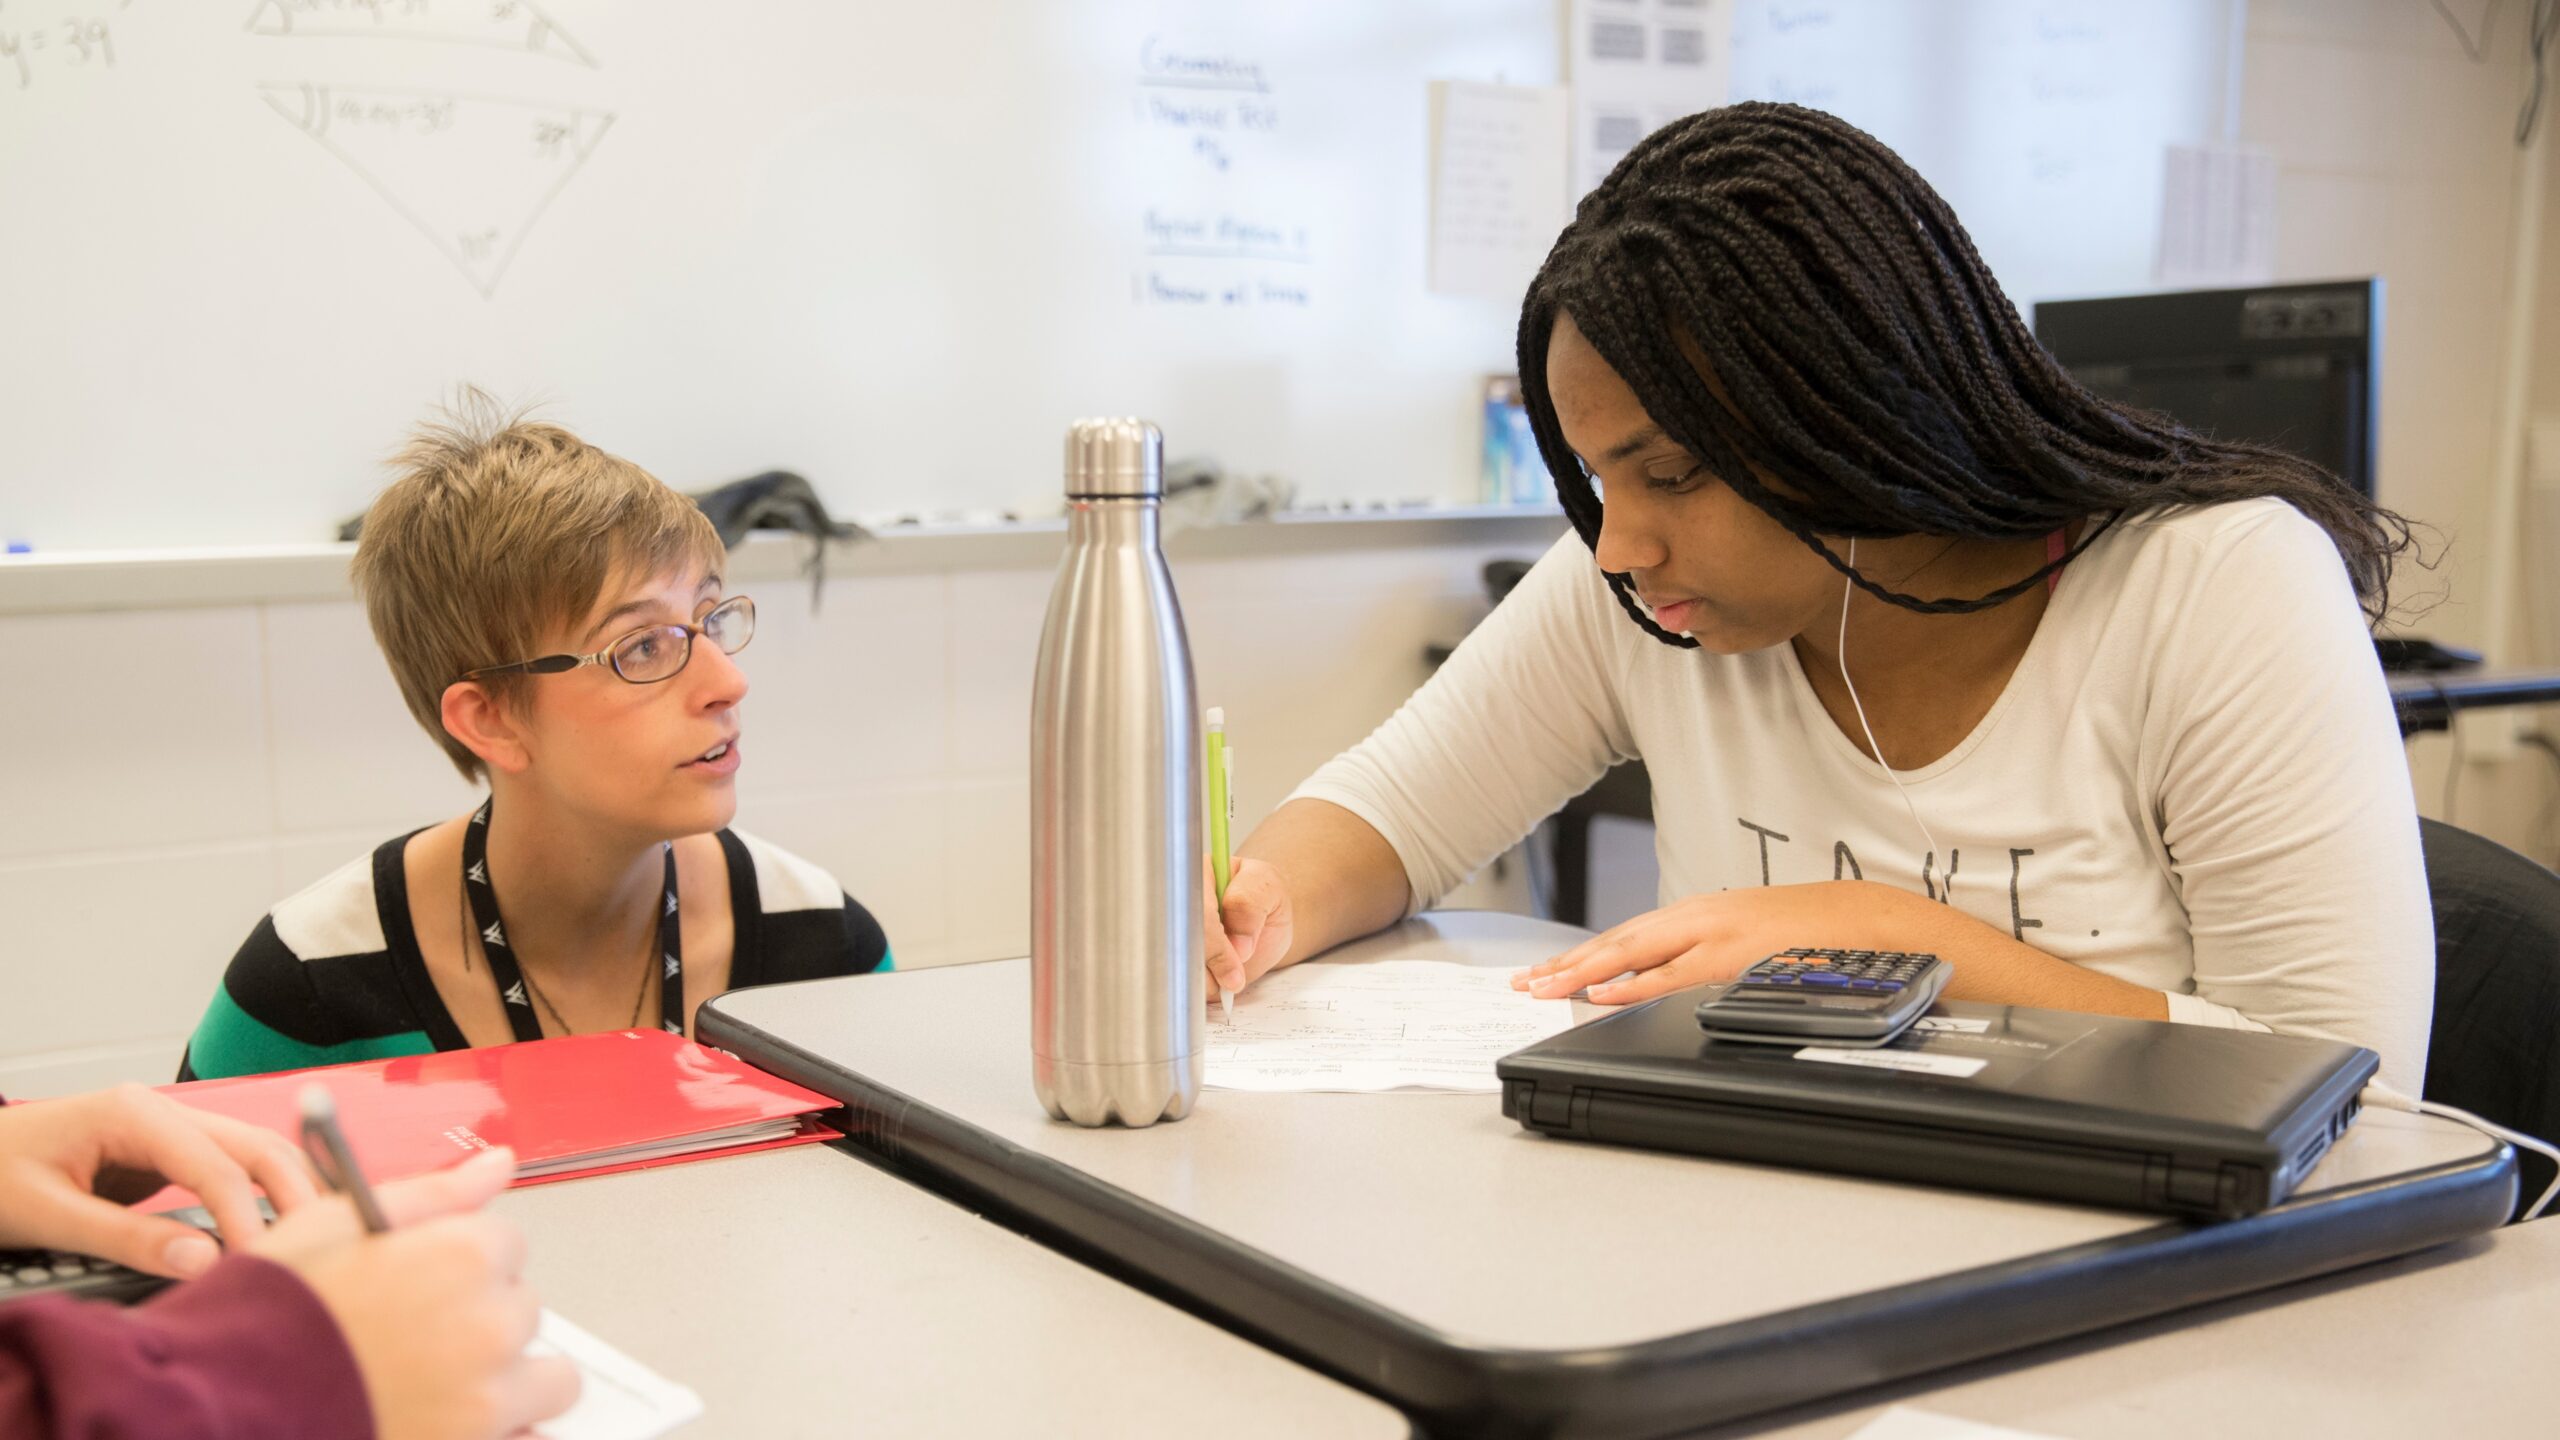 A Missouri State student teacher helps a student in this 2017 photo.